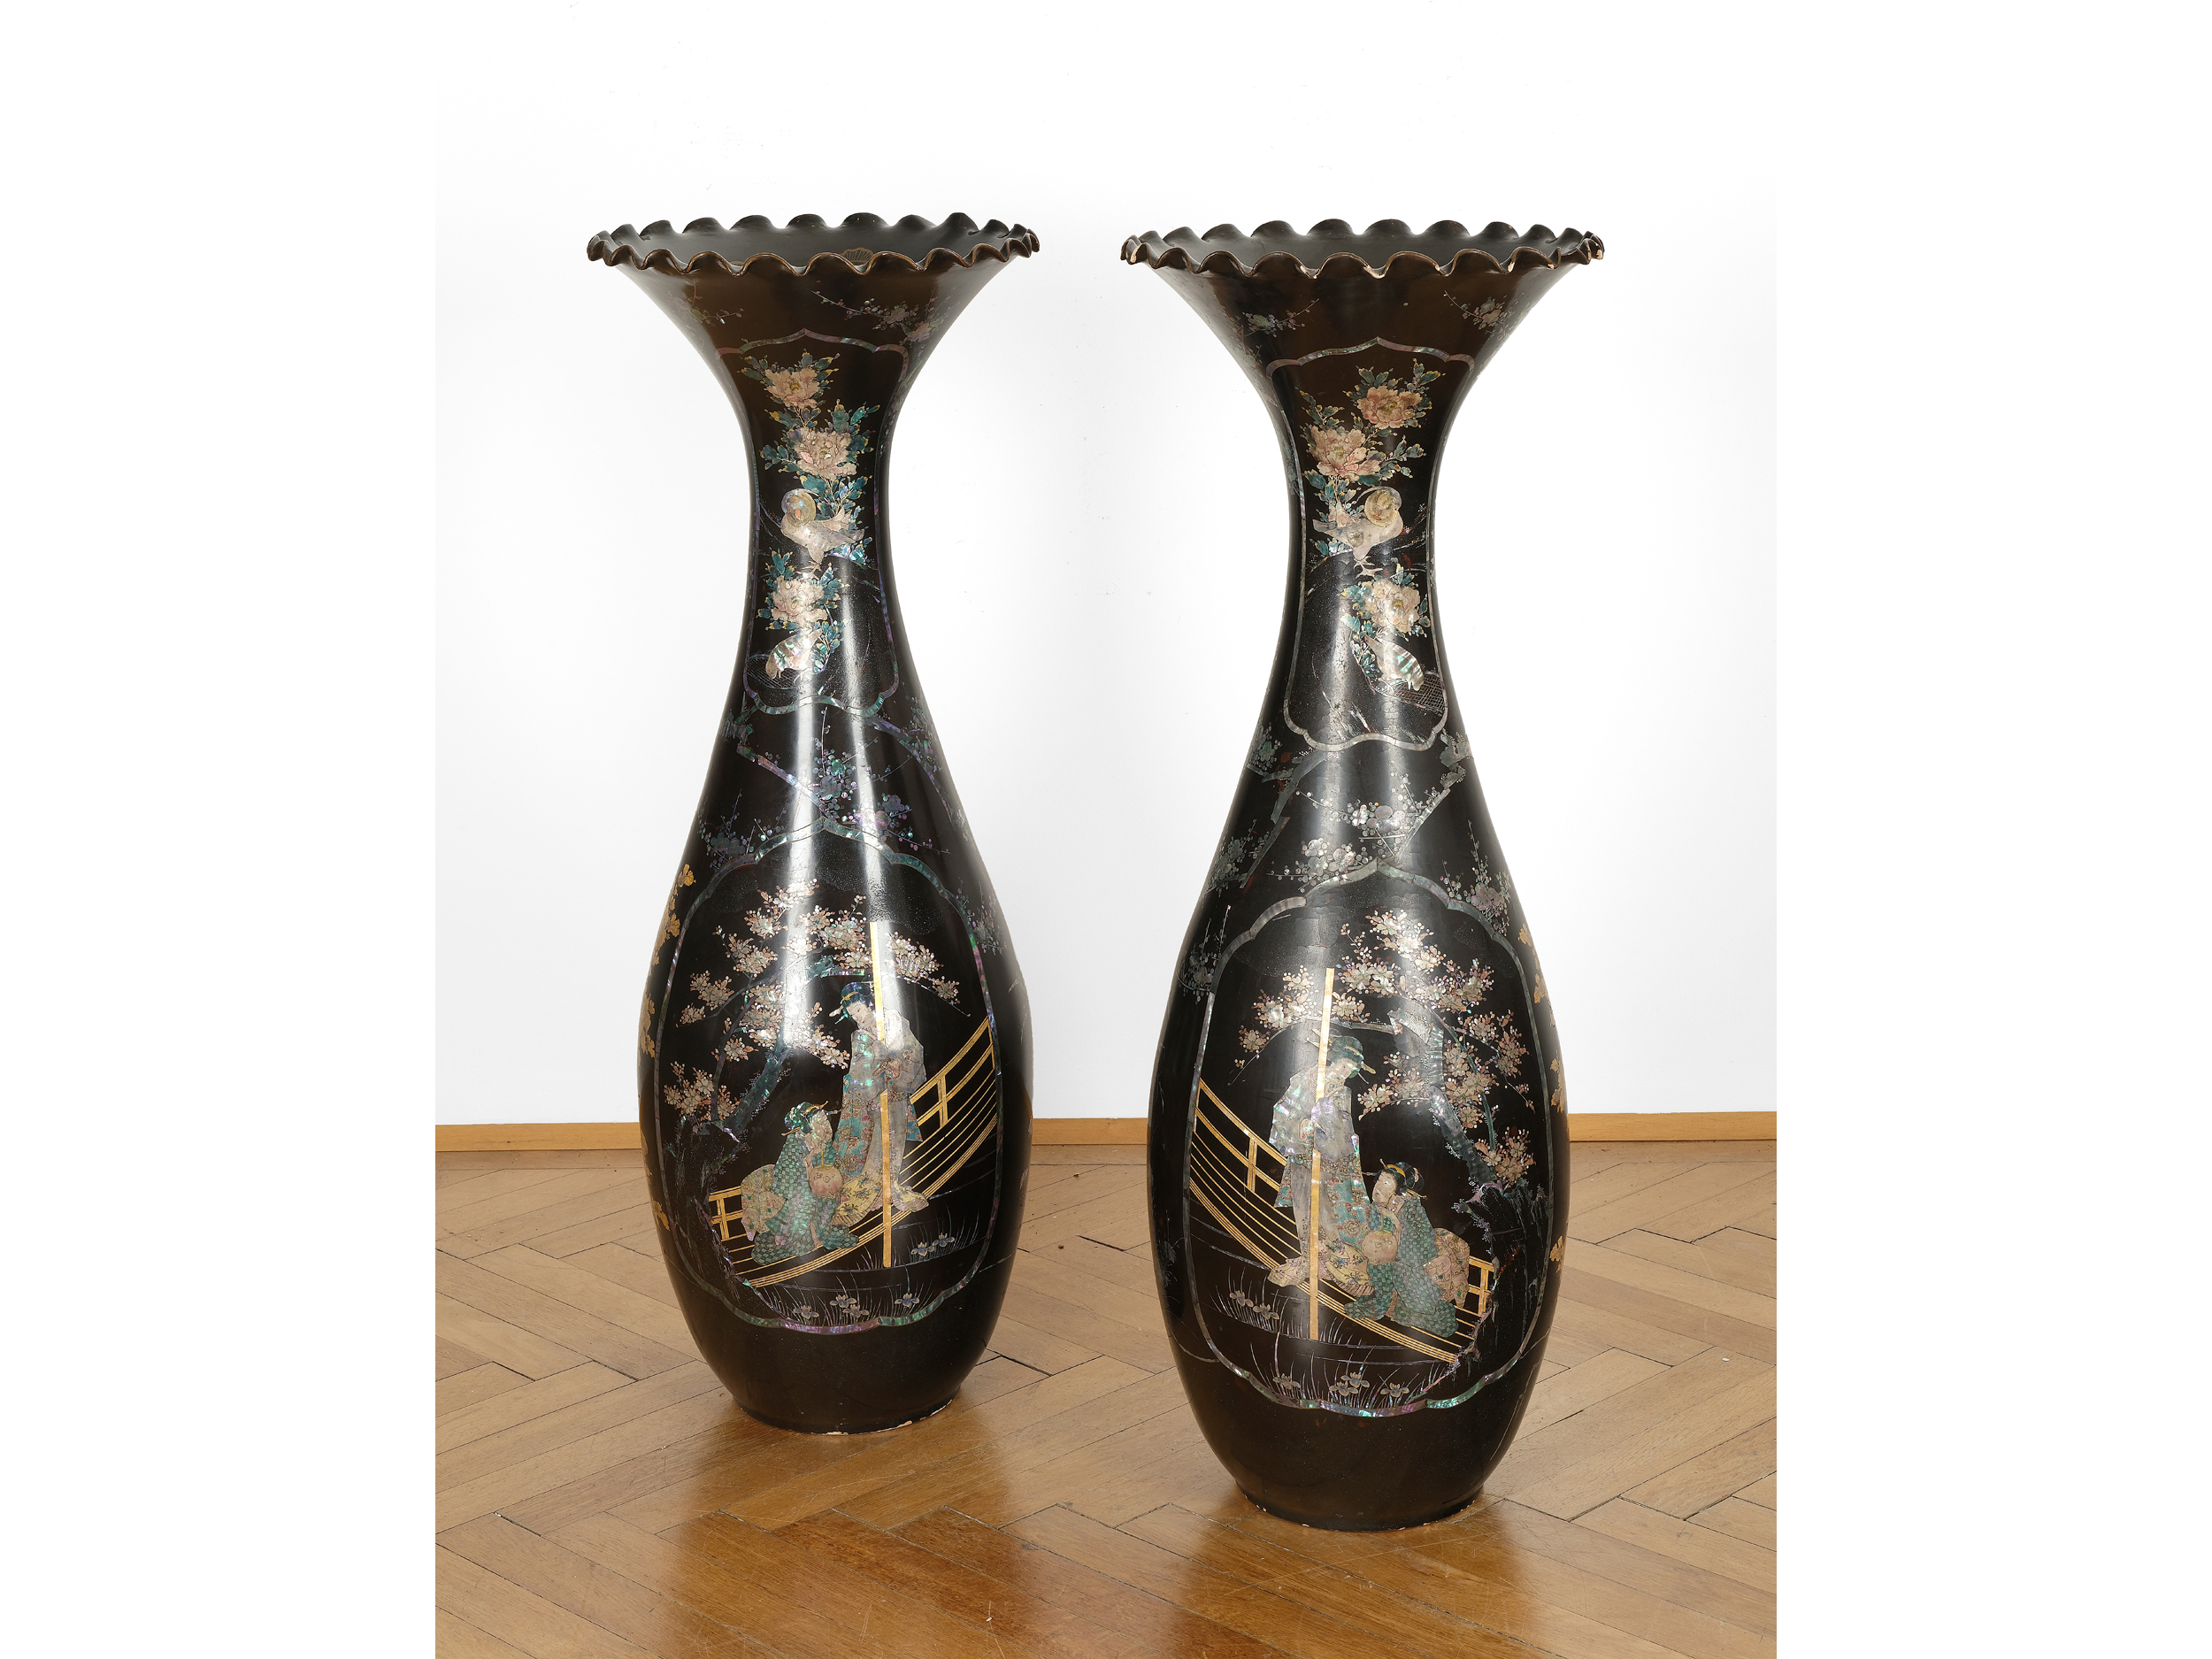 2 large vases, China/Japan?, Ceramic with mother-of-pearl inlays - Image 2 of 4